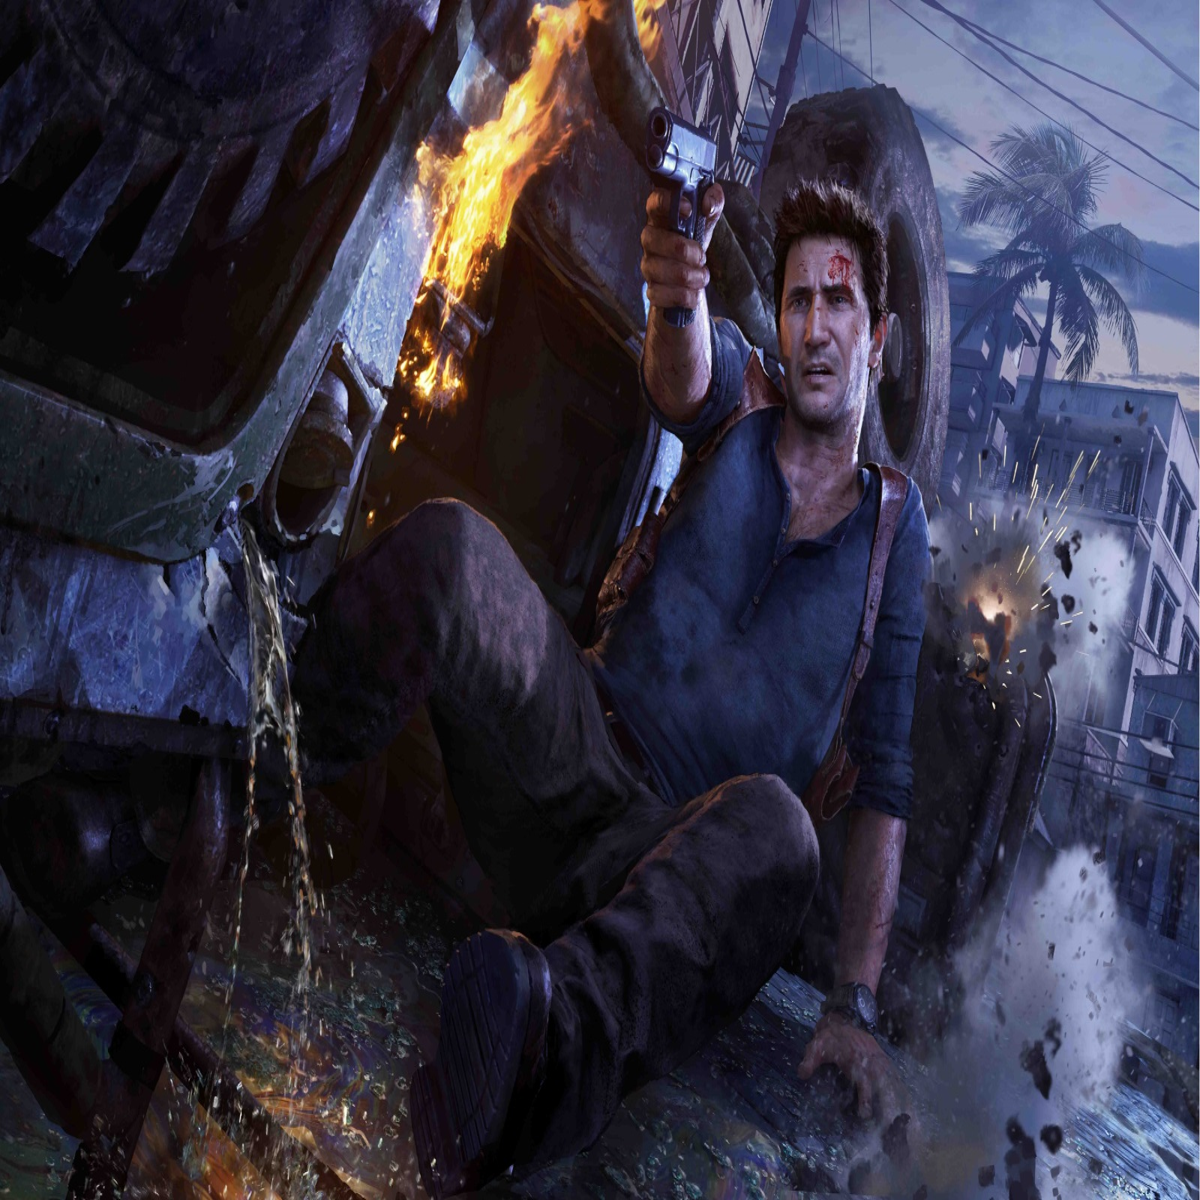 Uncharted 2 movie potential release date, cast and more